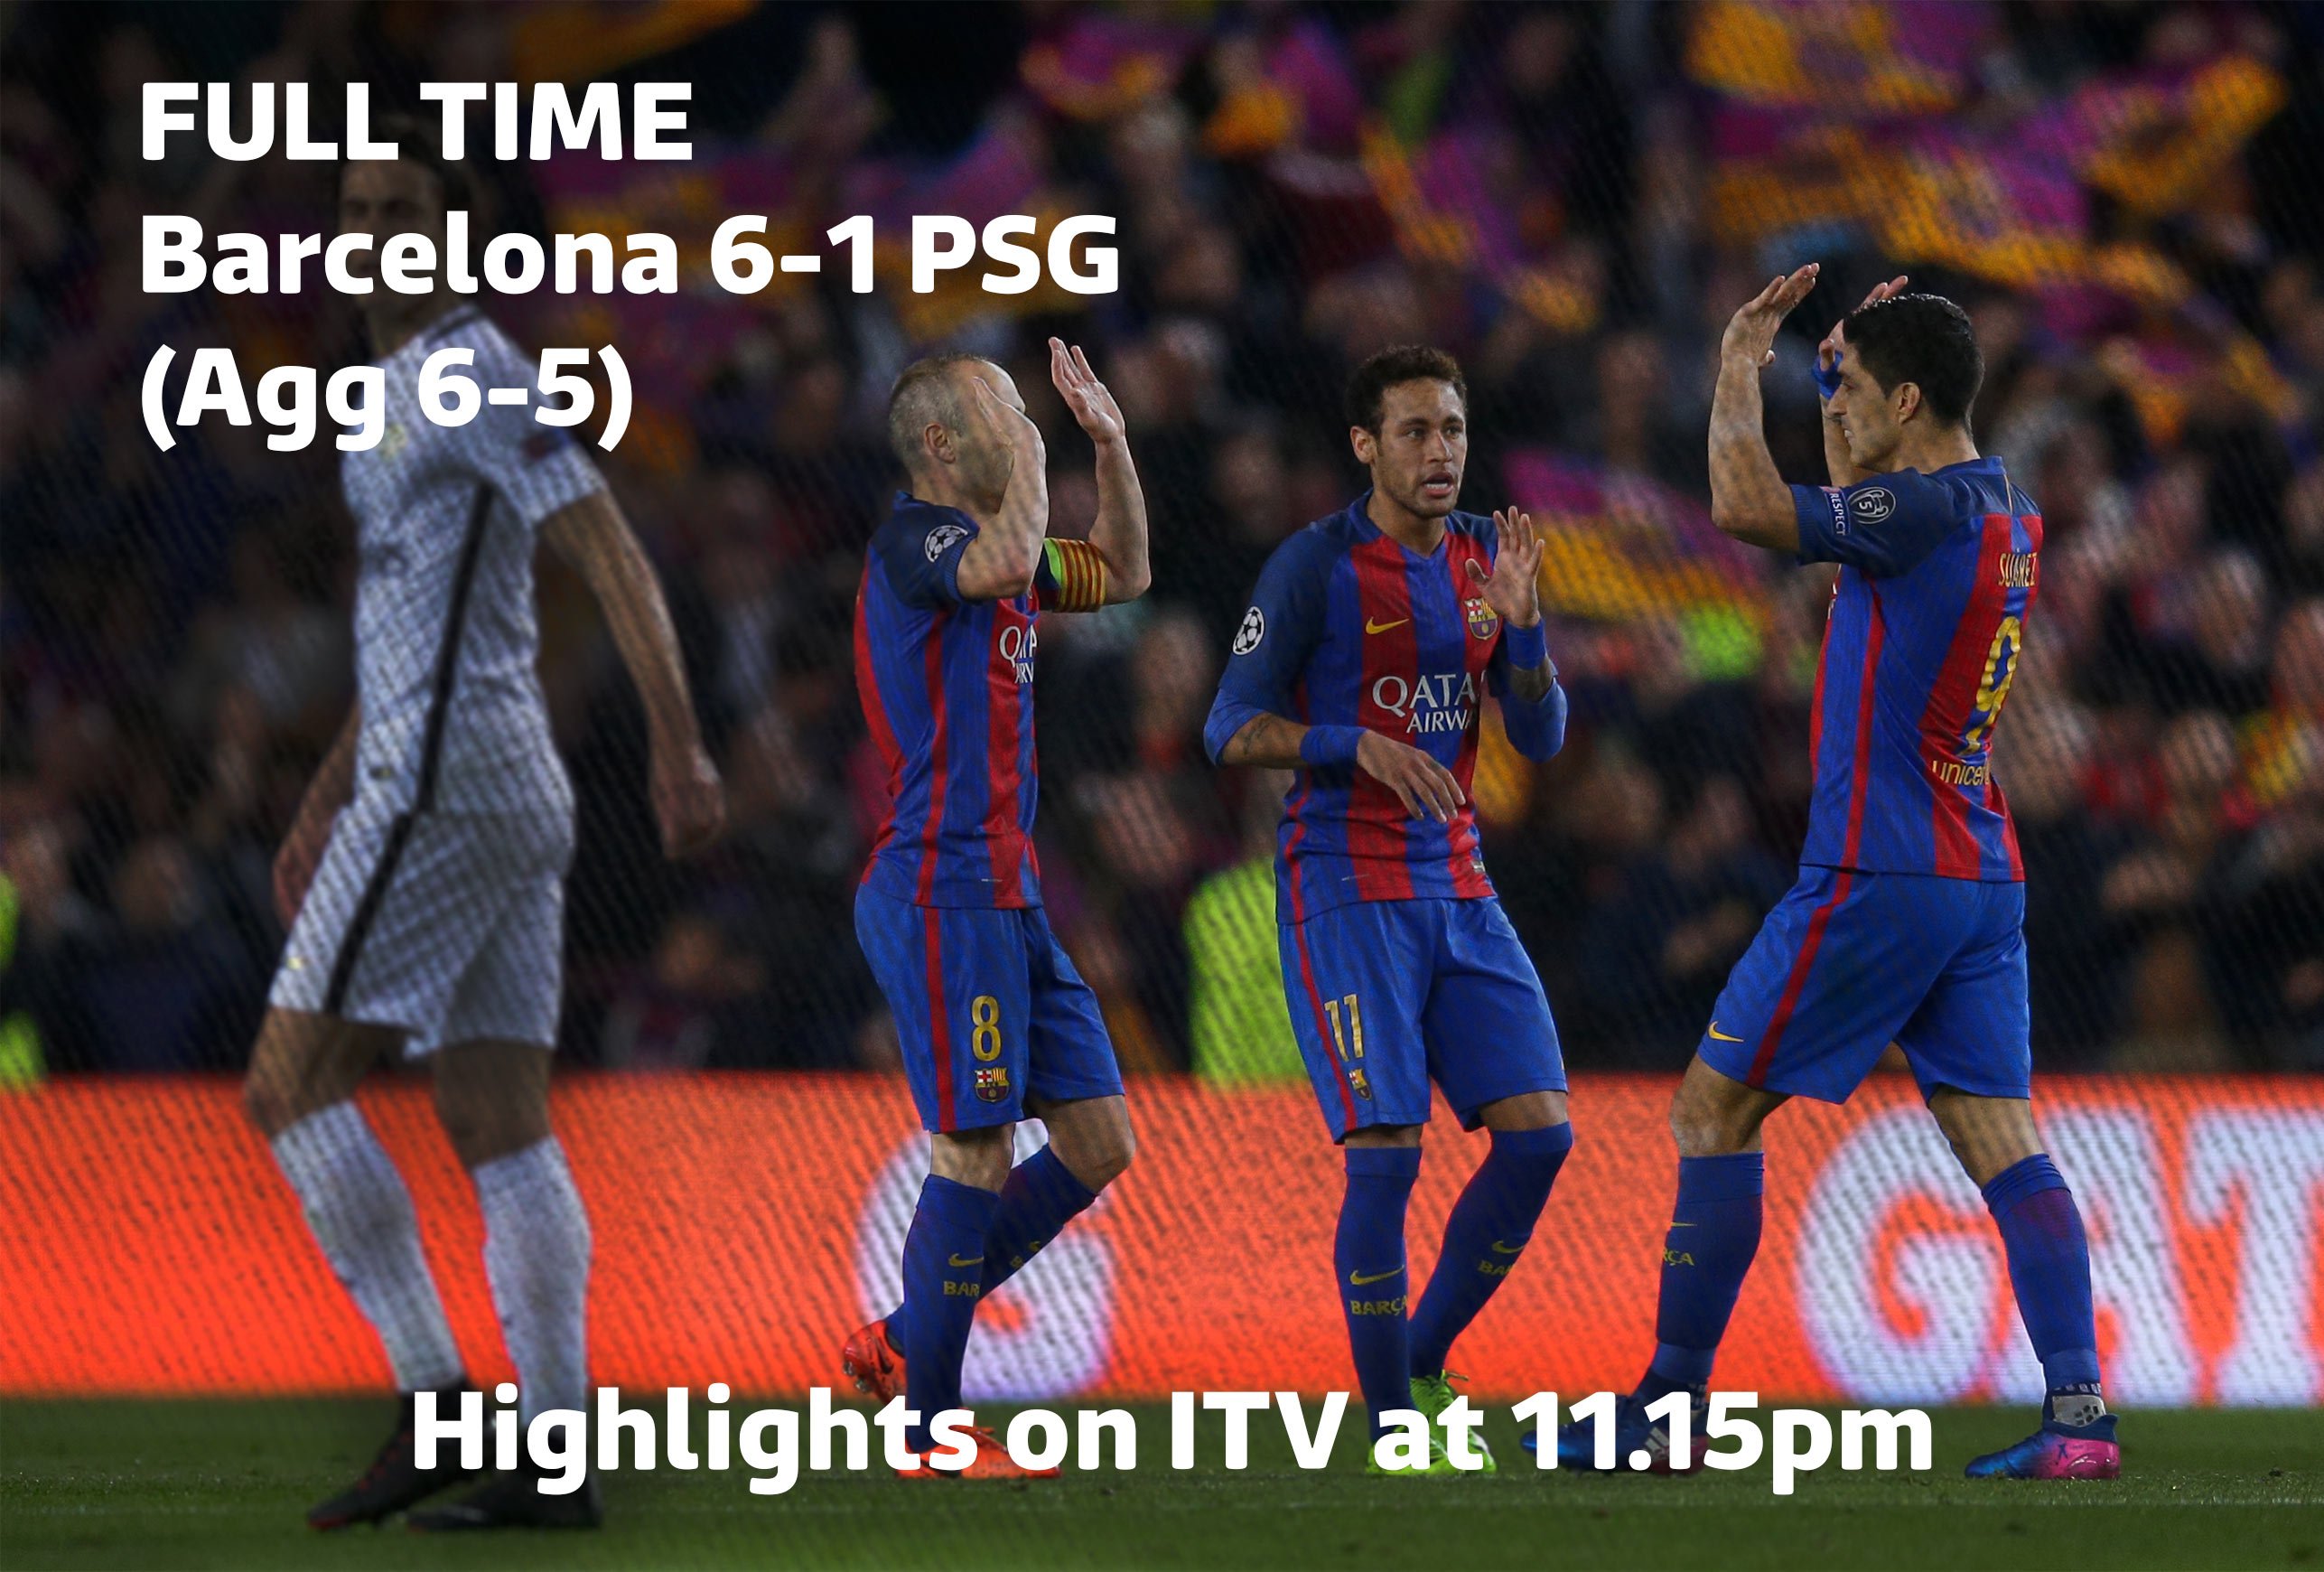 underholdning magi Måling ITV Football on Twitter: "⚽️⚽️⚽️⚽️⚽️⚽️ Barcelona 6-1 PSG All the highlights  and reaction with @markpougatch, Roy Keane and @GlennHoddle on @ITV at  11.15pm https://t.co/YKUd26Mq7C" / Twitter